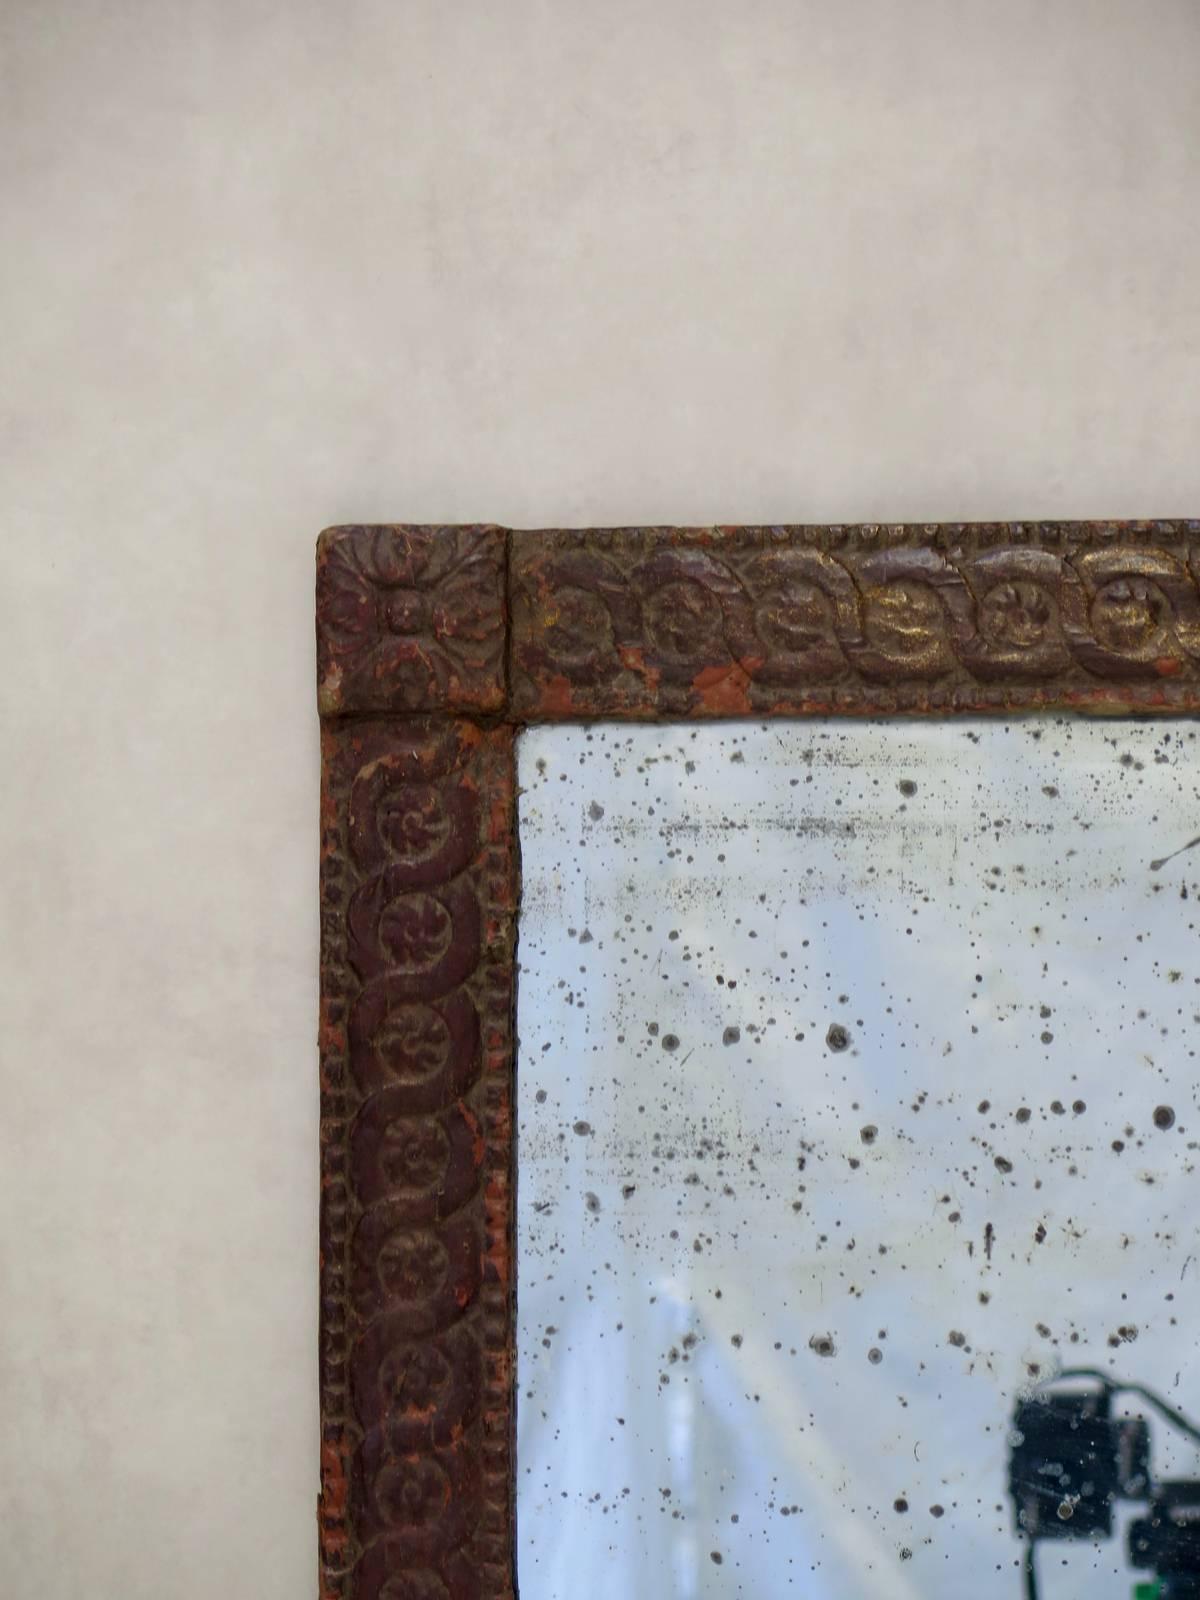 Late 19th century mirror and frame. The wooden frame is clad in paper that has been stamped with a scrolled frieze, marked at each corner with a rosette. Original mercury-backed mirror, with lots of sugaring. The manufacturer's label is still